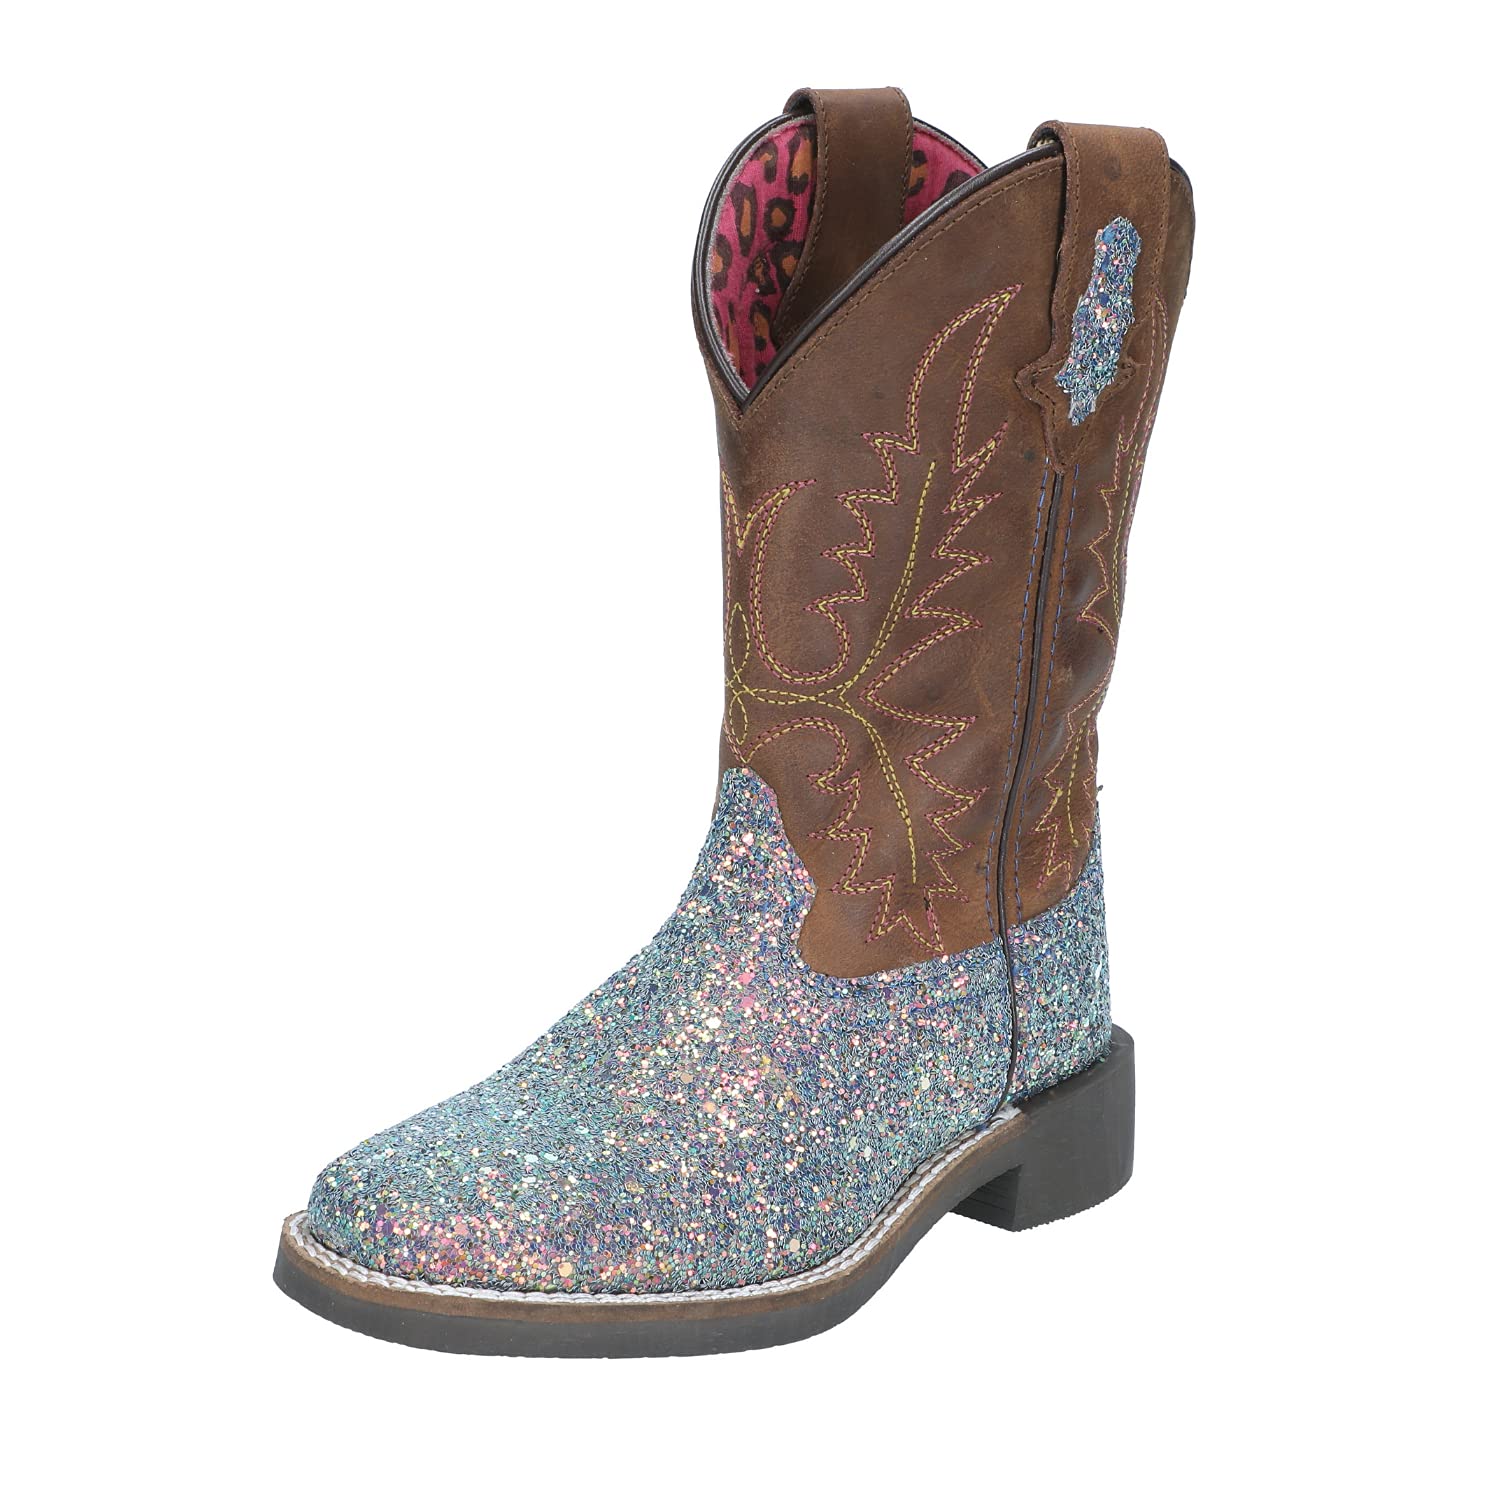 Smoky Mountain Boots | Ariel Series | Youth Western Boot | Square Toe | Genuine Leather | Glitter Foot | TPR Sole & Block Heel | Leather Shaft & Tricot Lining | Man-Made Trim